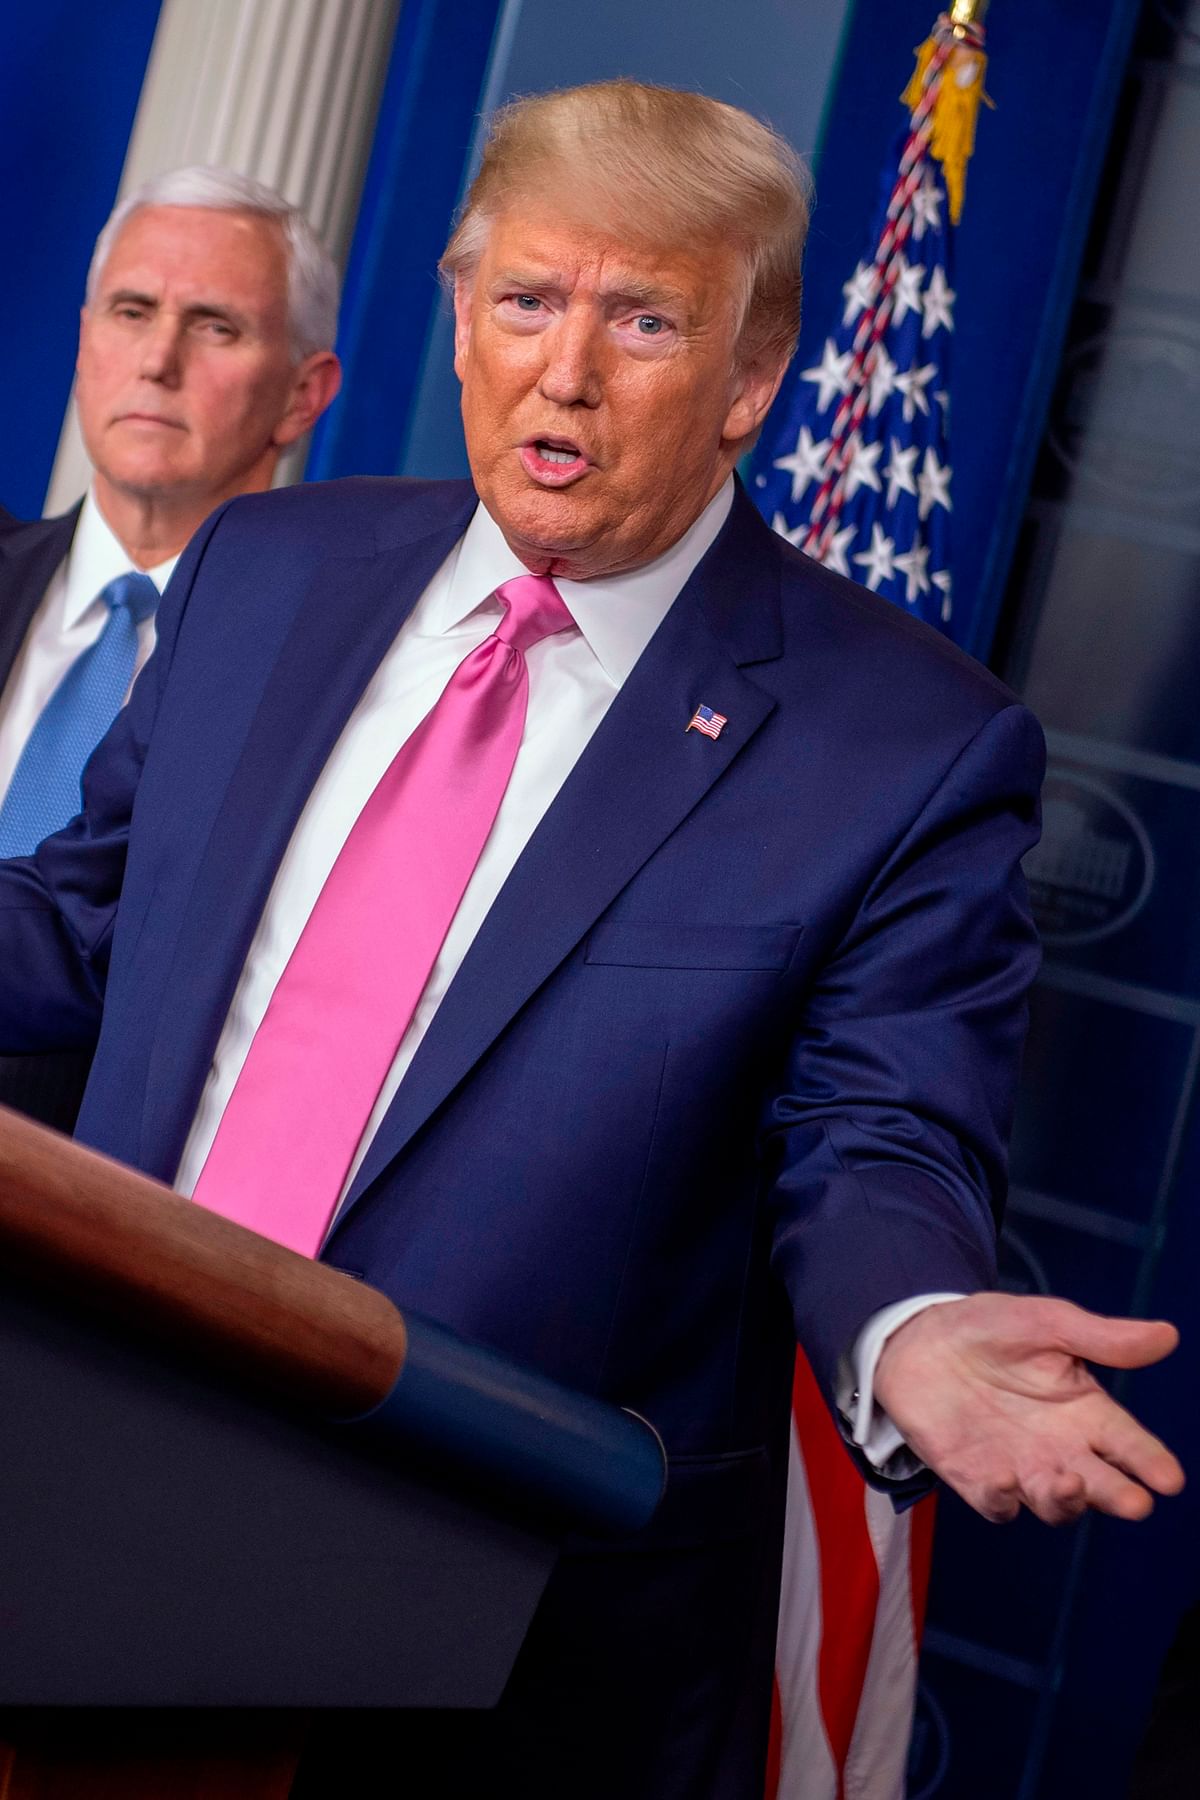 US president Donald Trump gestures as he speaks during a news conference on the COVID-19 outbreak at the White House on 26 February 2020. Photo: AFP